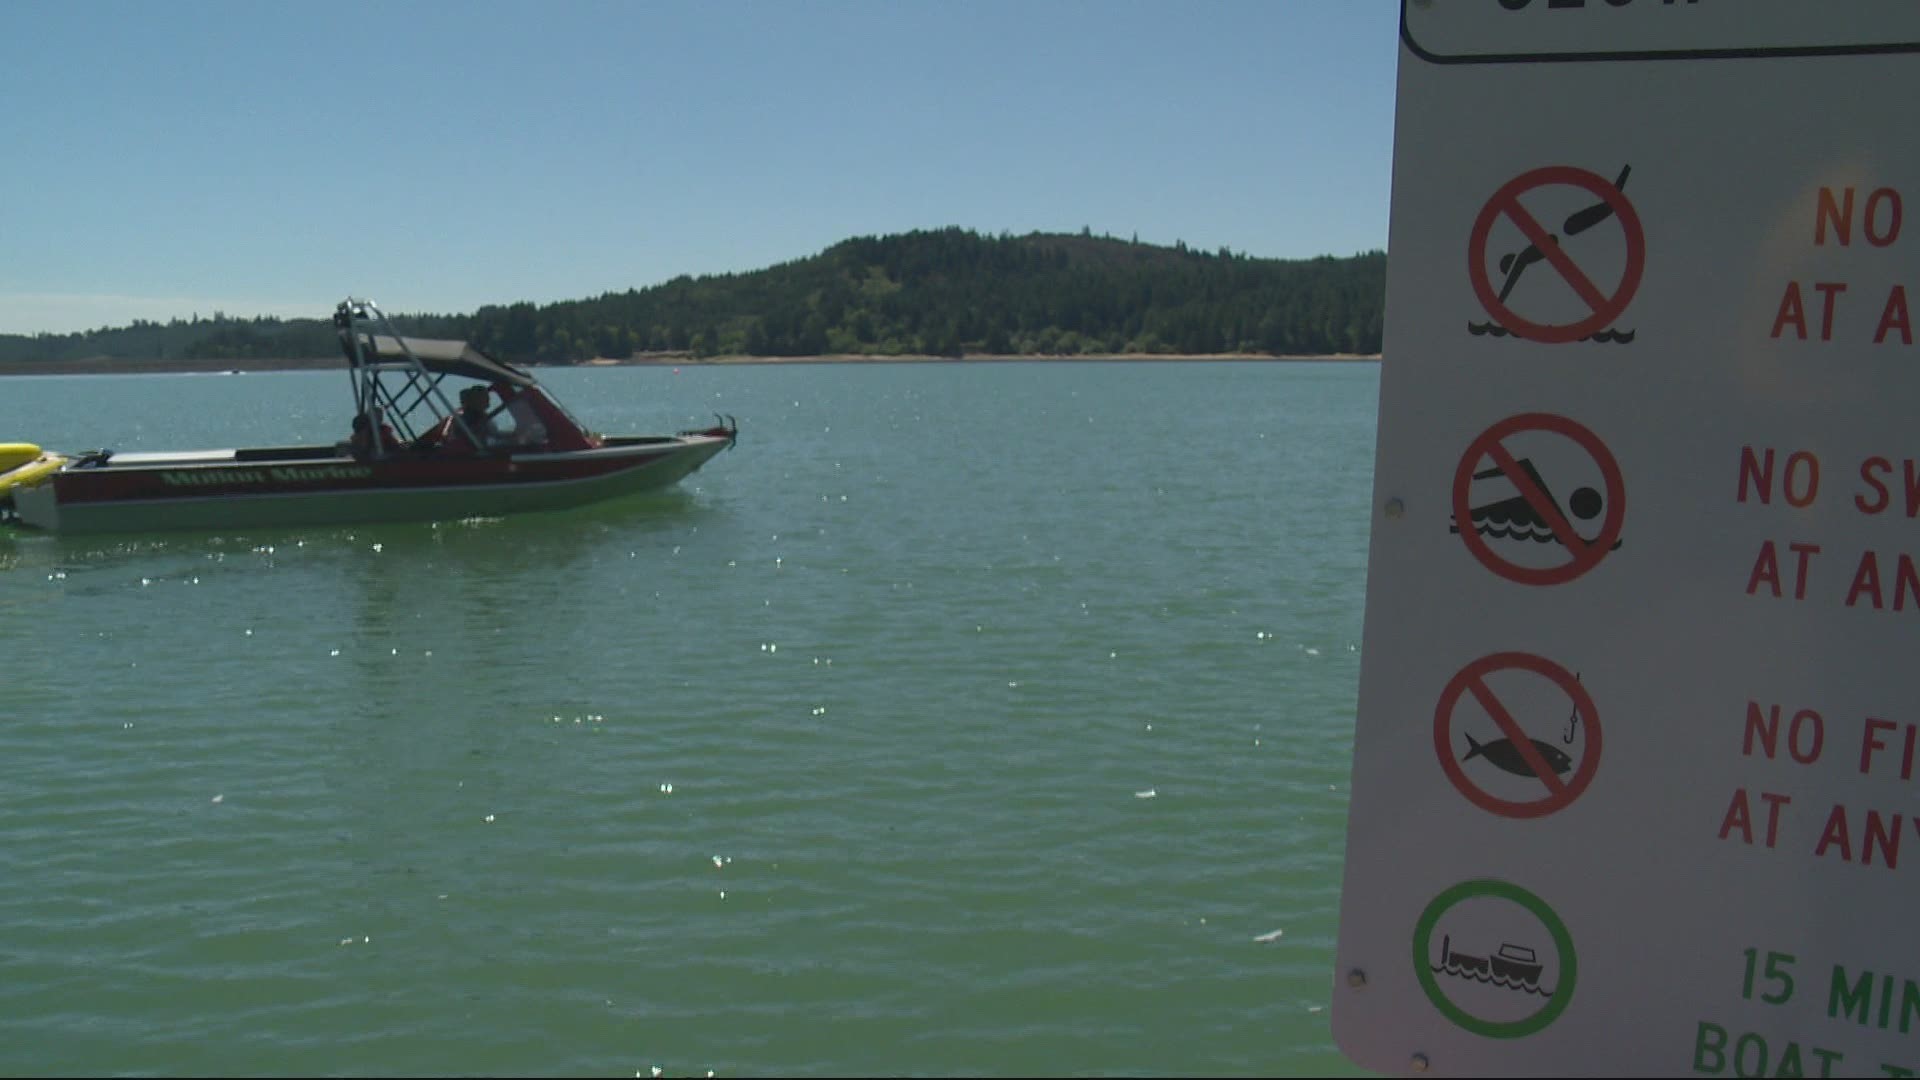 The Oregon Health Authority is trying to figure out if the water at Hagg Lake killed a family’s dog. The dog died last week after playing in the water.